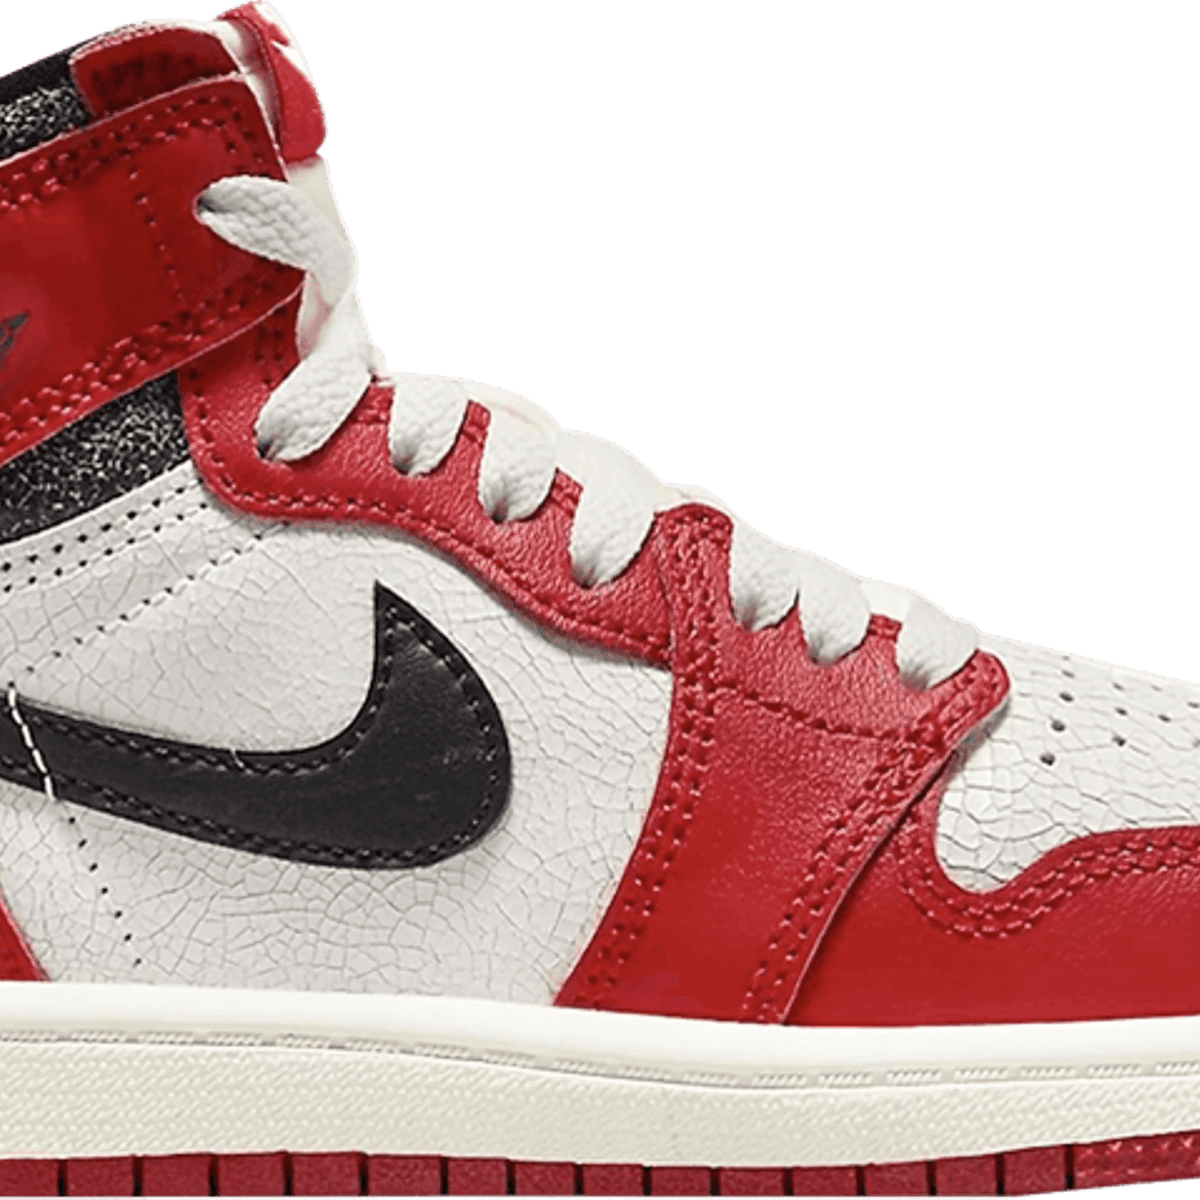 Nike Air Jordan 1 Retro High OG Chicago Lost and Found (PS)